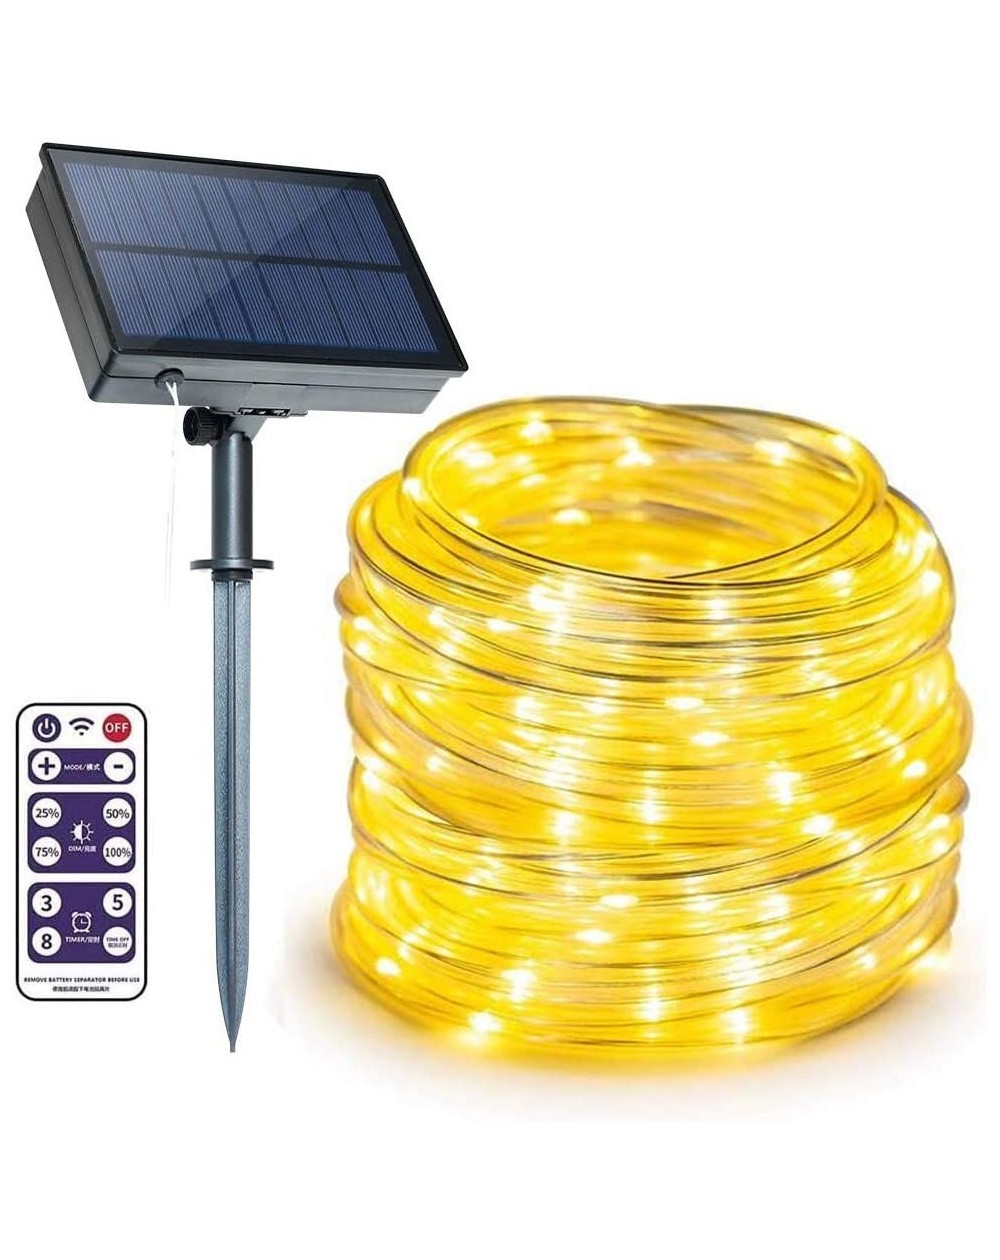 Outdoor String Lights Solar Rope Lights Outdoor- IP67 Waterproof 66ft 200leds Solar Powered String Lights- 8 Modes Dimmable/T...